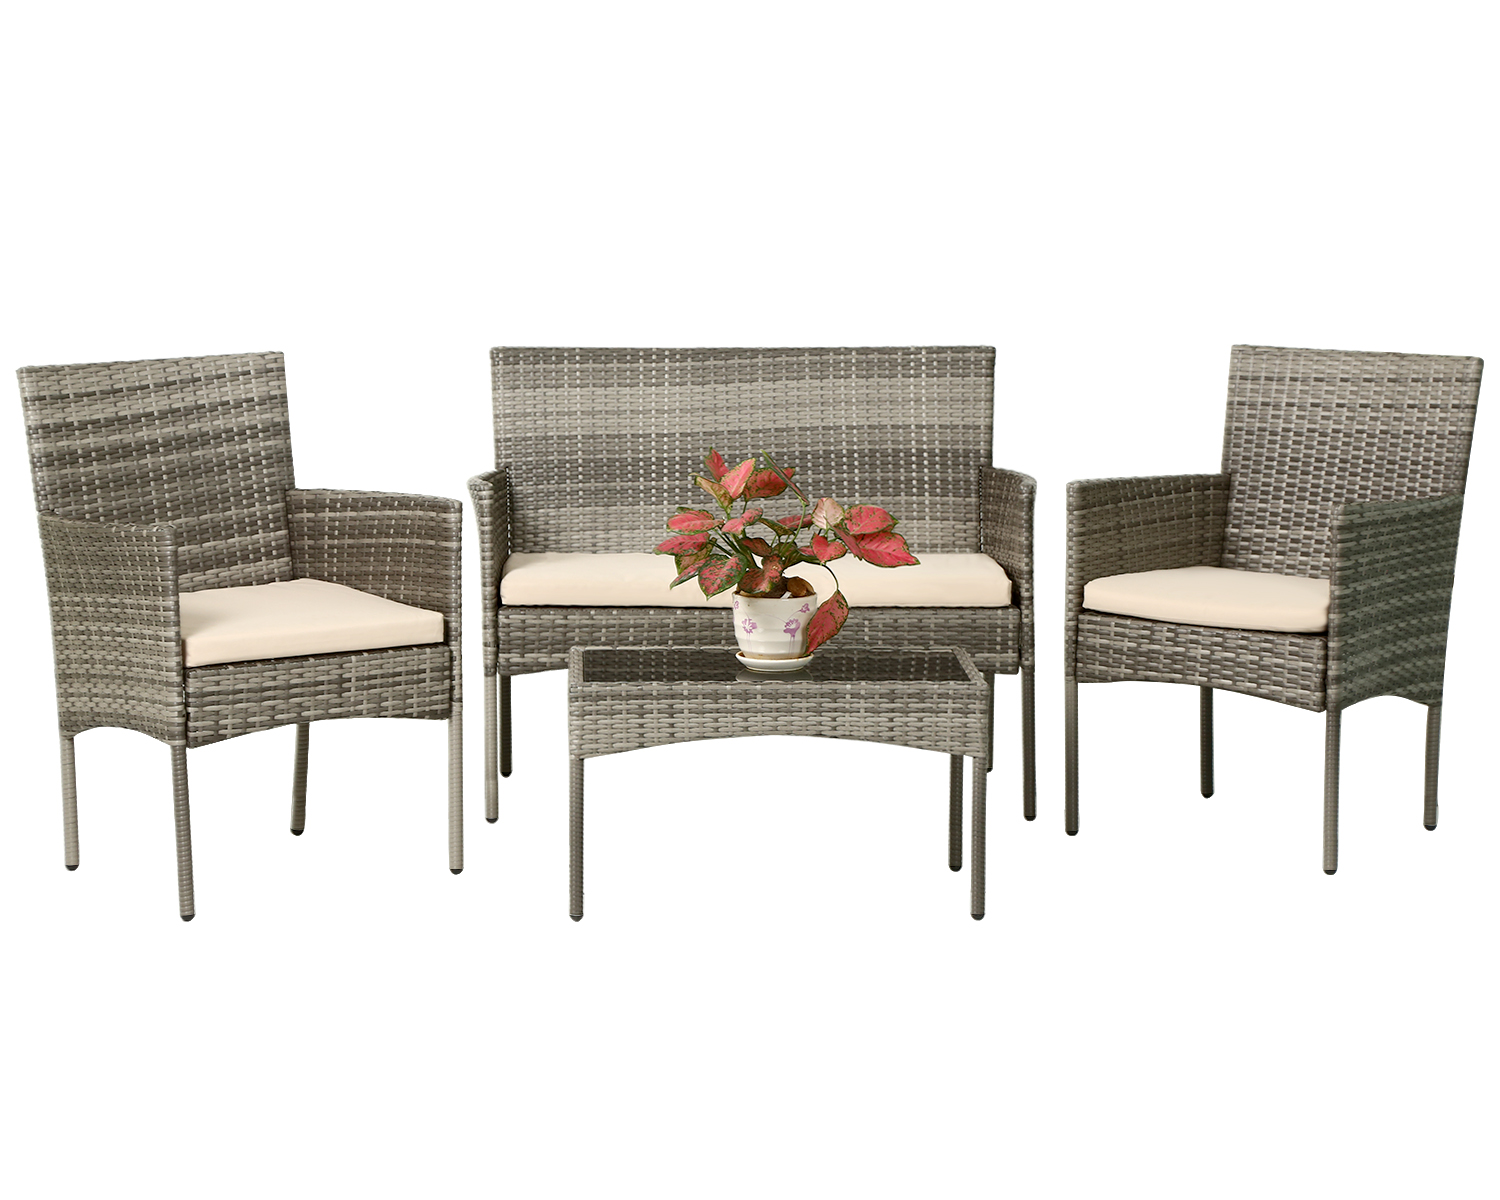 Patio Conversation Set 4 Pieces Patio Furniture Set Wicker with Rattan Chair Loveseats Coffee Table for Outdoor Indoor Garden Backyard Porch Poolside Balcony,Gray Wicker/Khaki Cushions - image 1 of 7